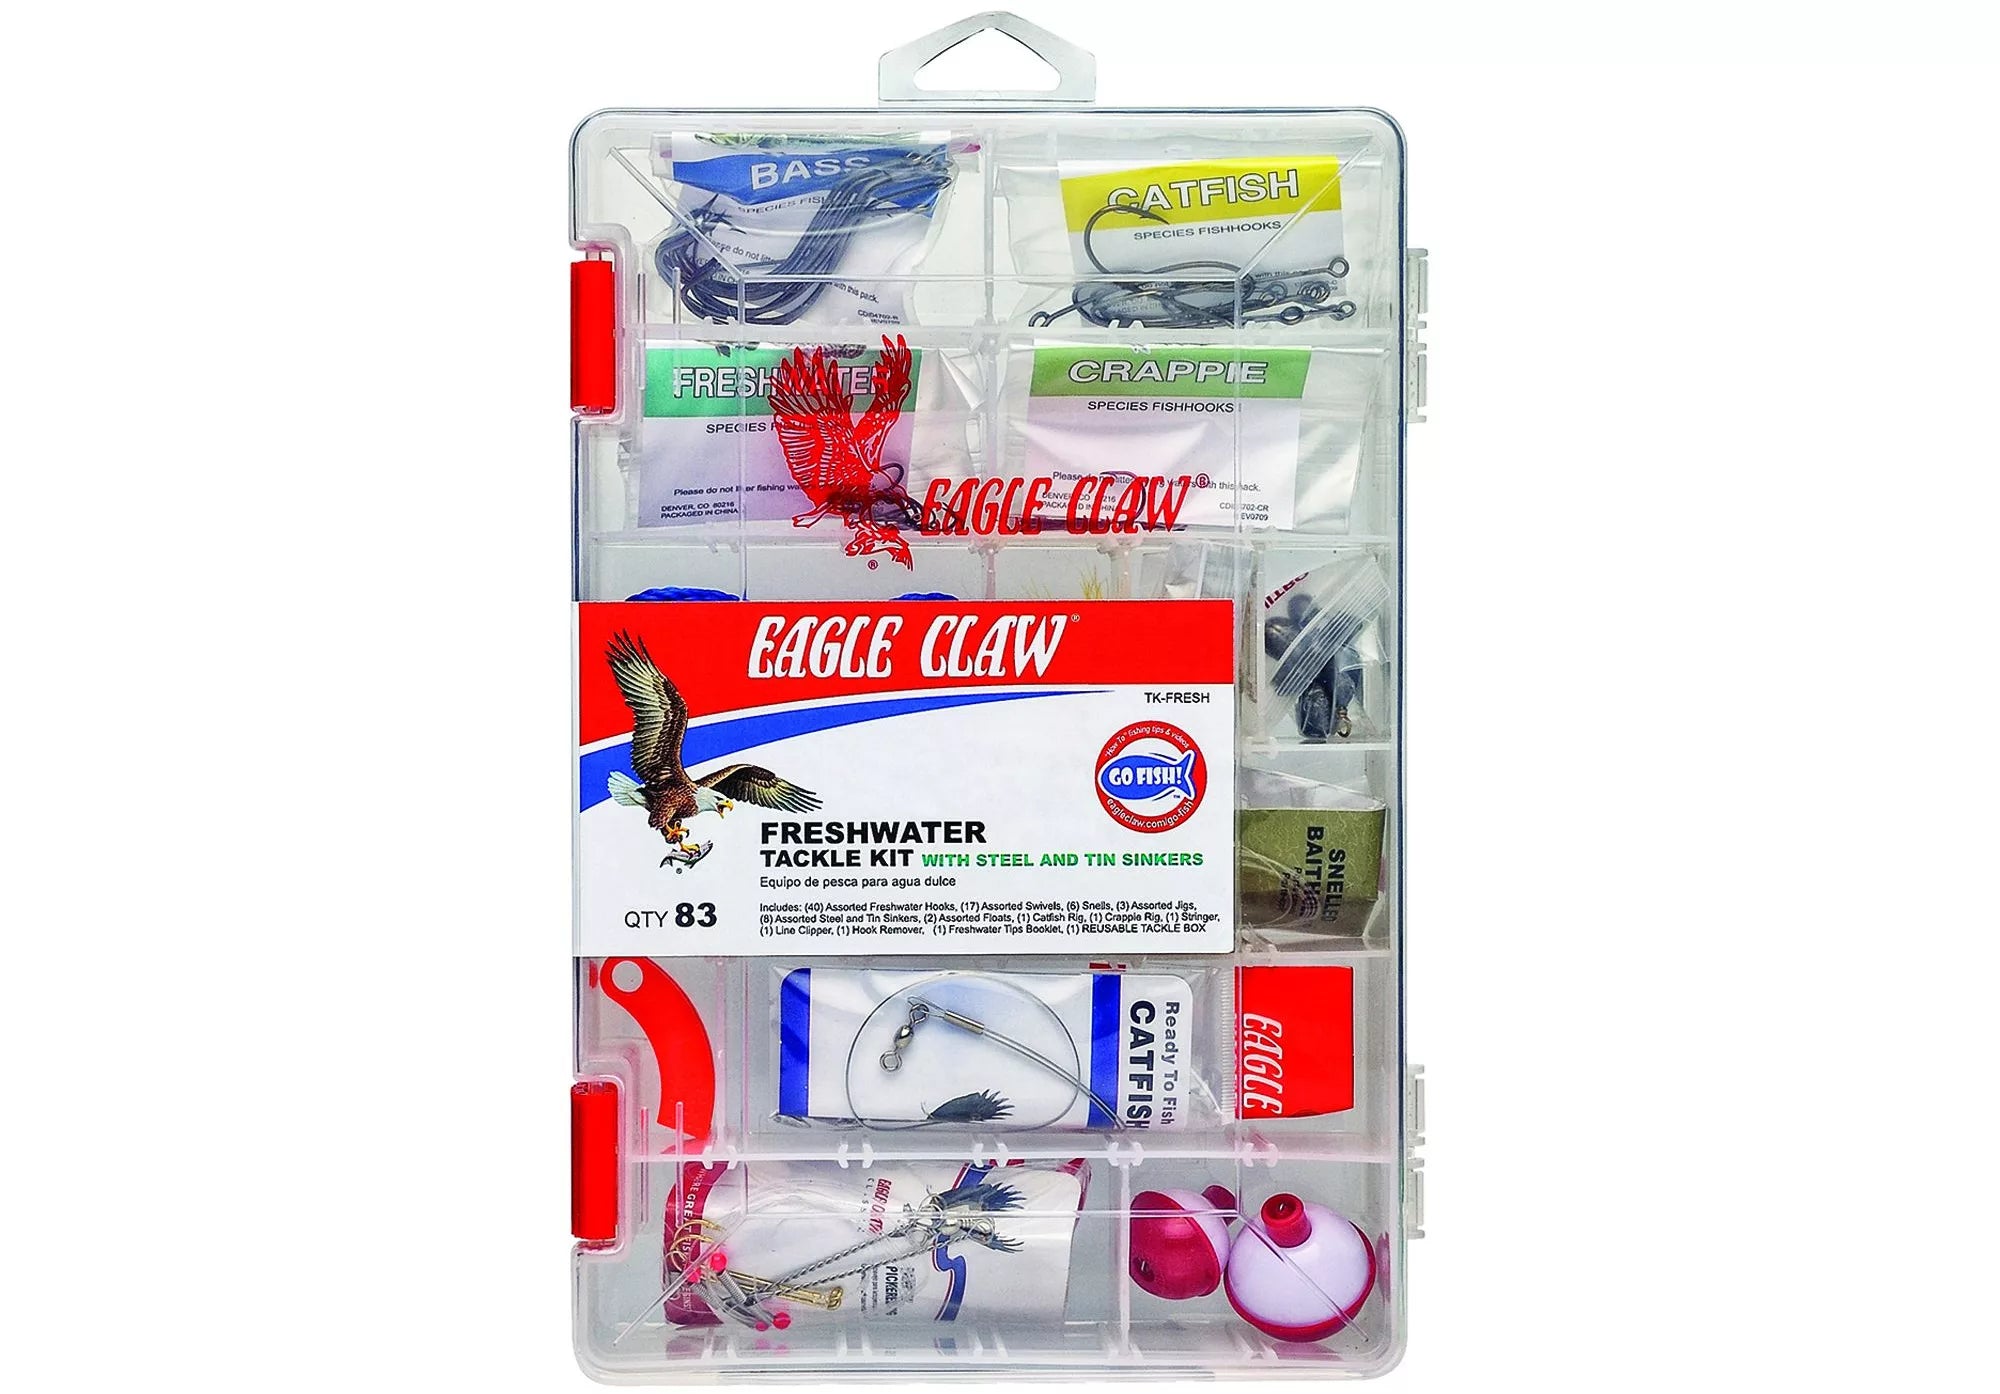 Eagle Claw FreshwaterTackle Kit